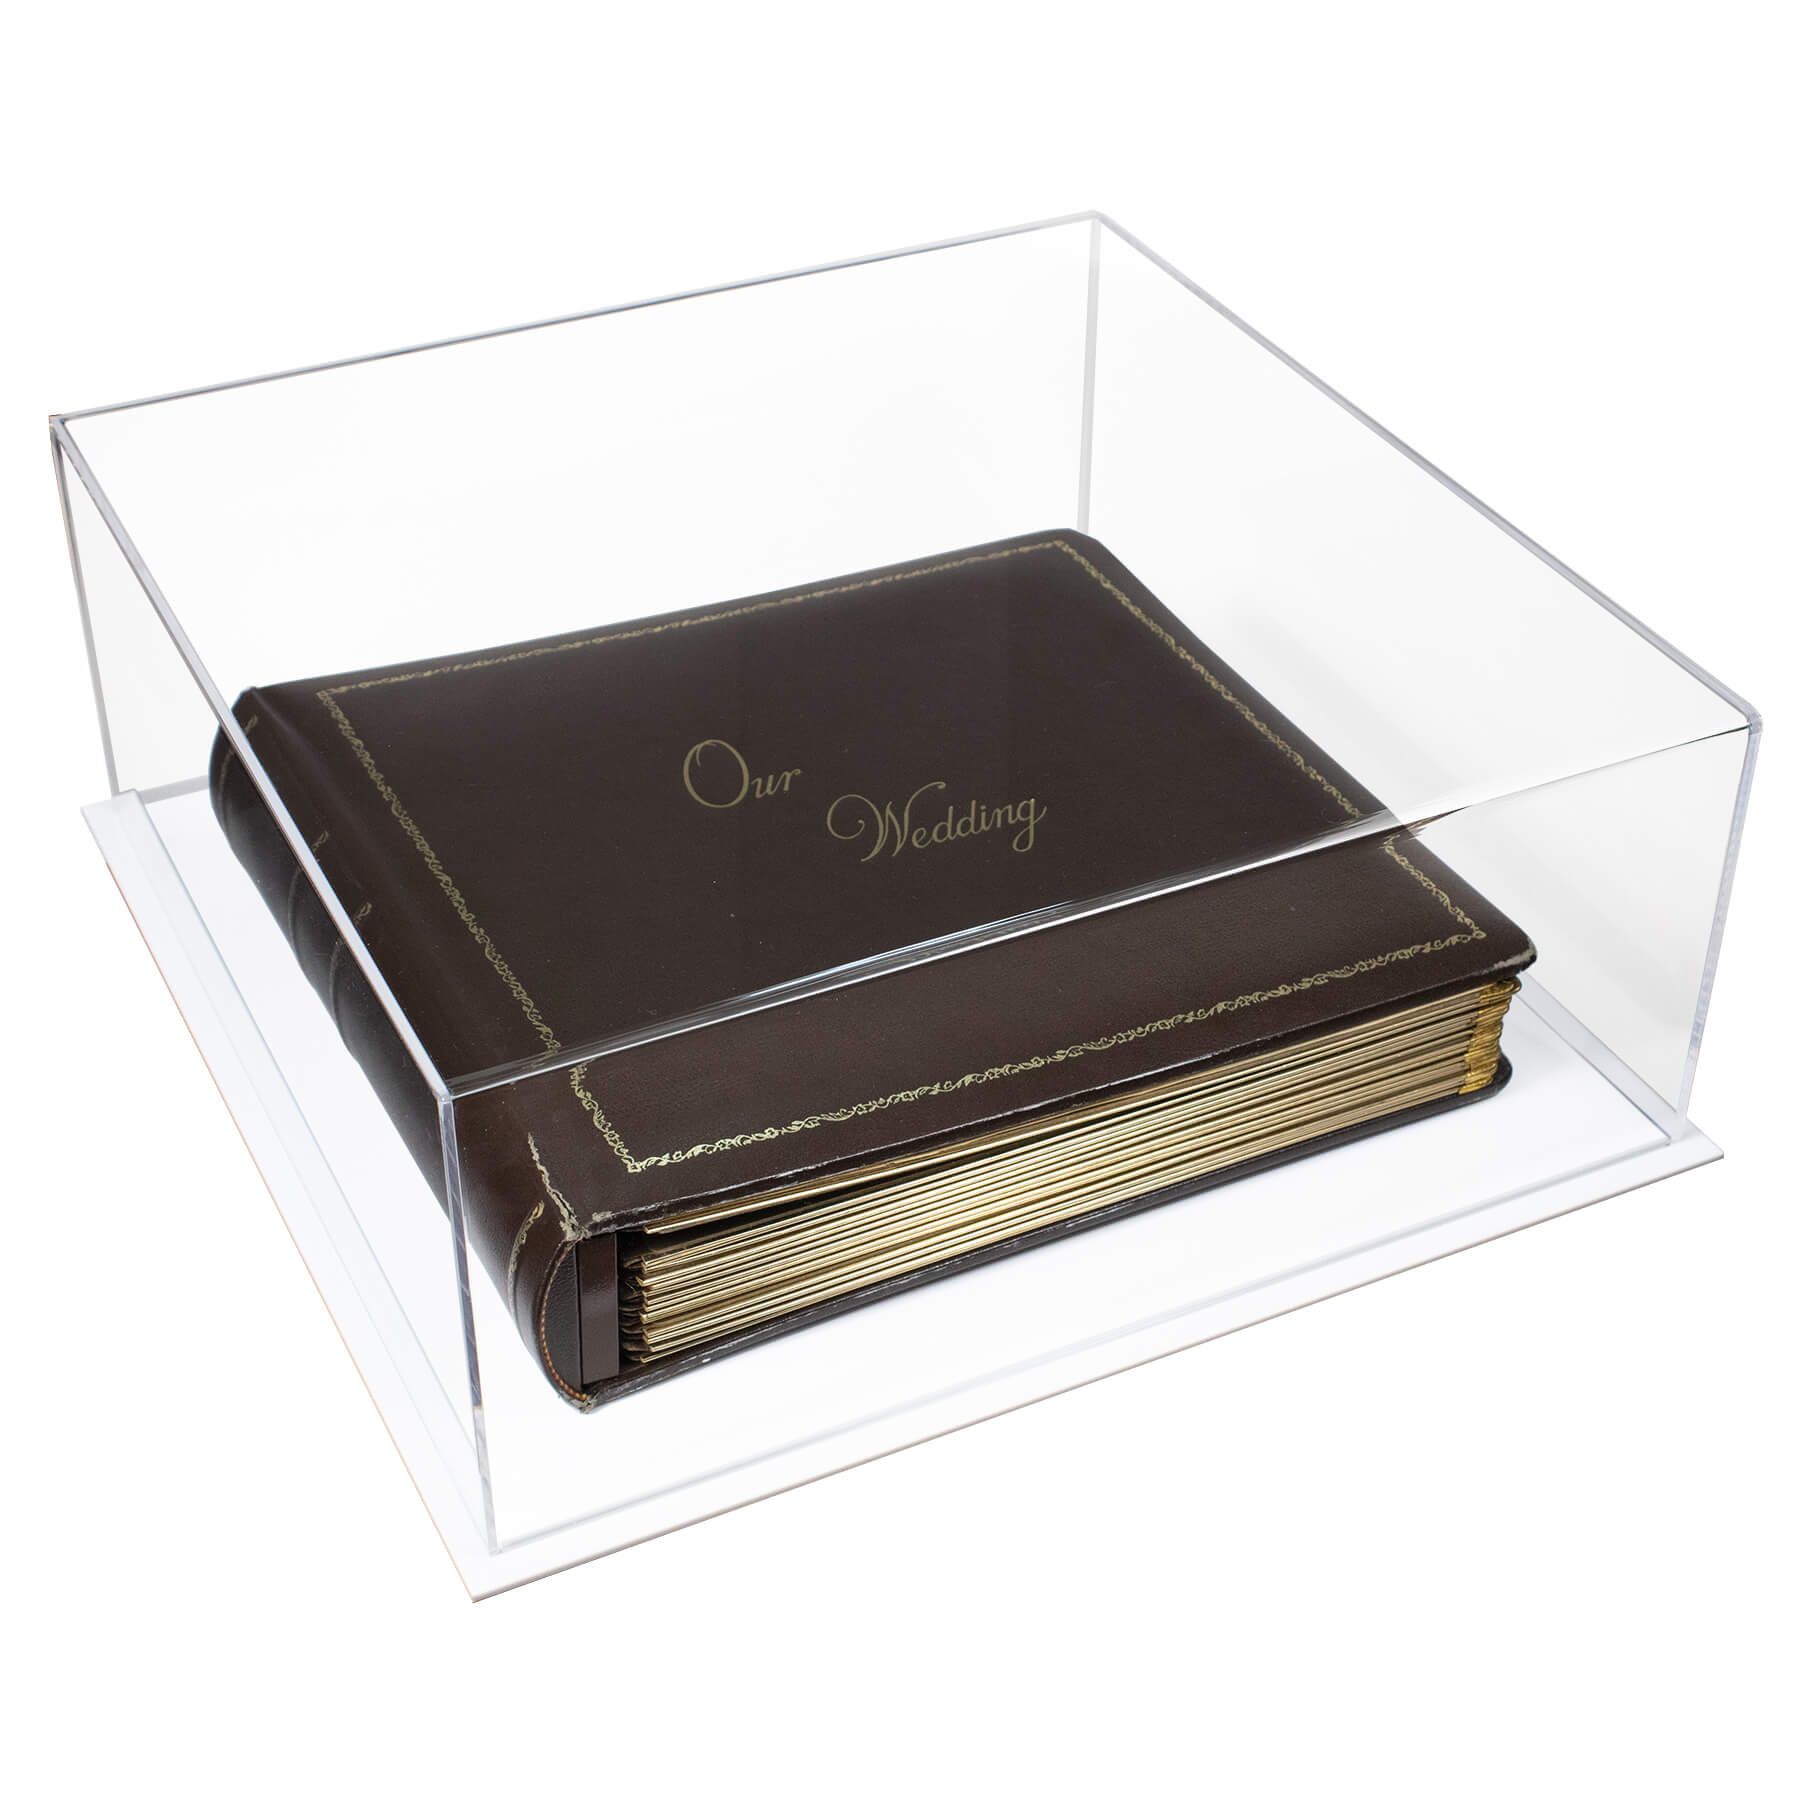 Acrylic Display Book, Photo Album Case Large Rectangle Box With